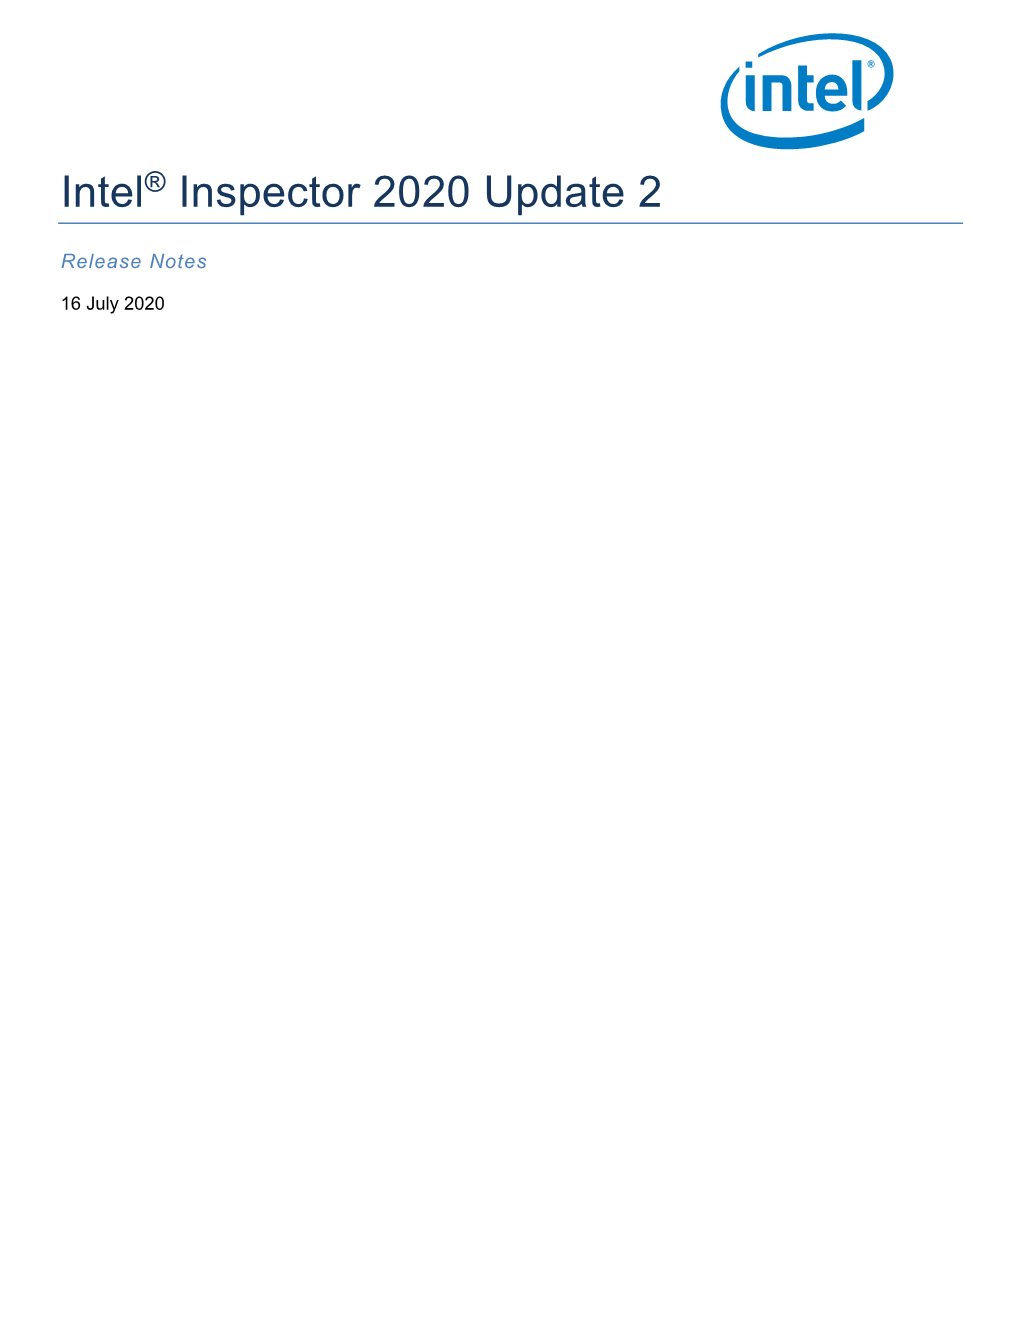 Intel® Inspector 2020 Update 2 Release Notes Intel® Inspector 2020 Update 2 to Learn More About This Product, See